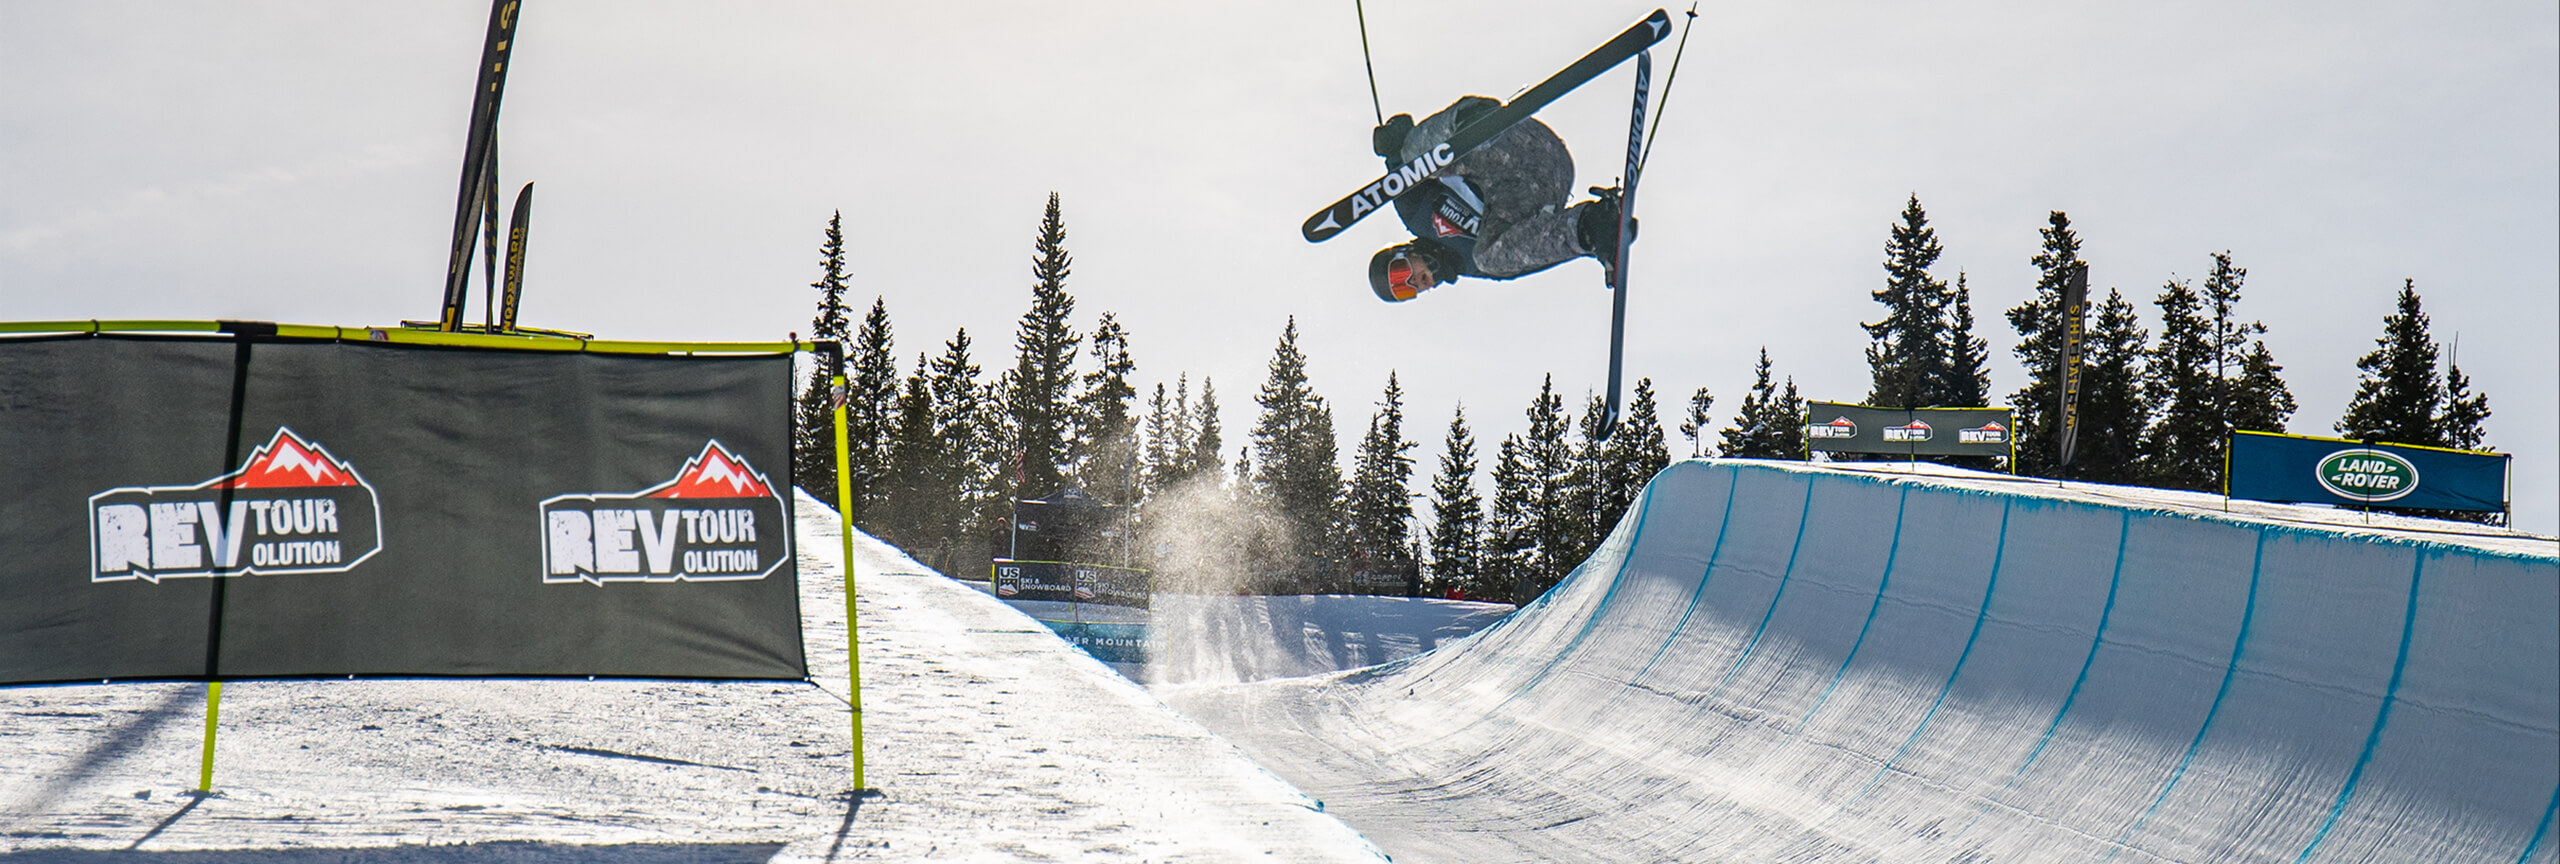 Skier doing trick in half pipe at U.S. Revolution Tour at Copper Mountain